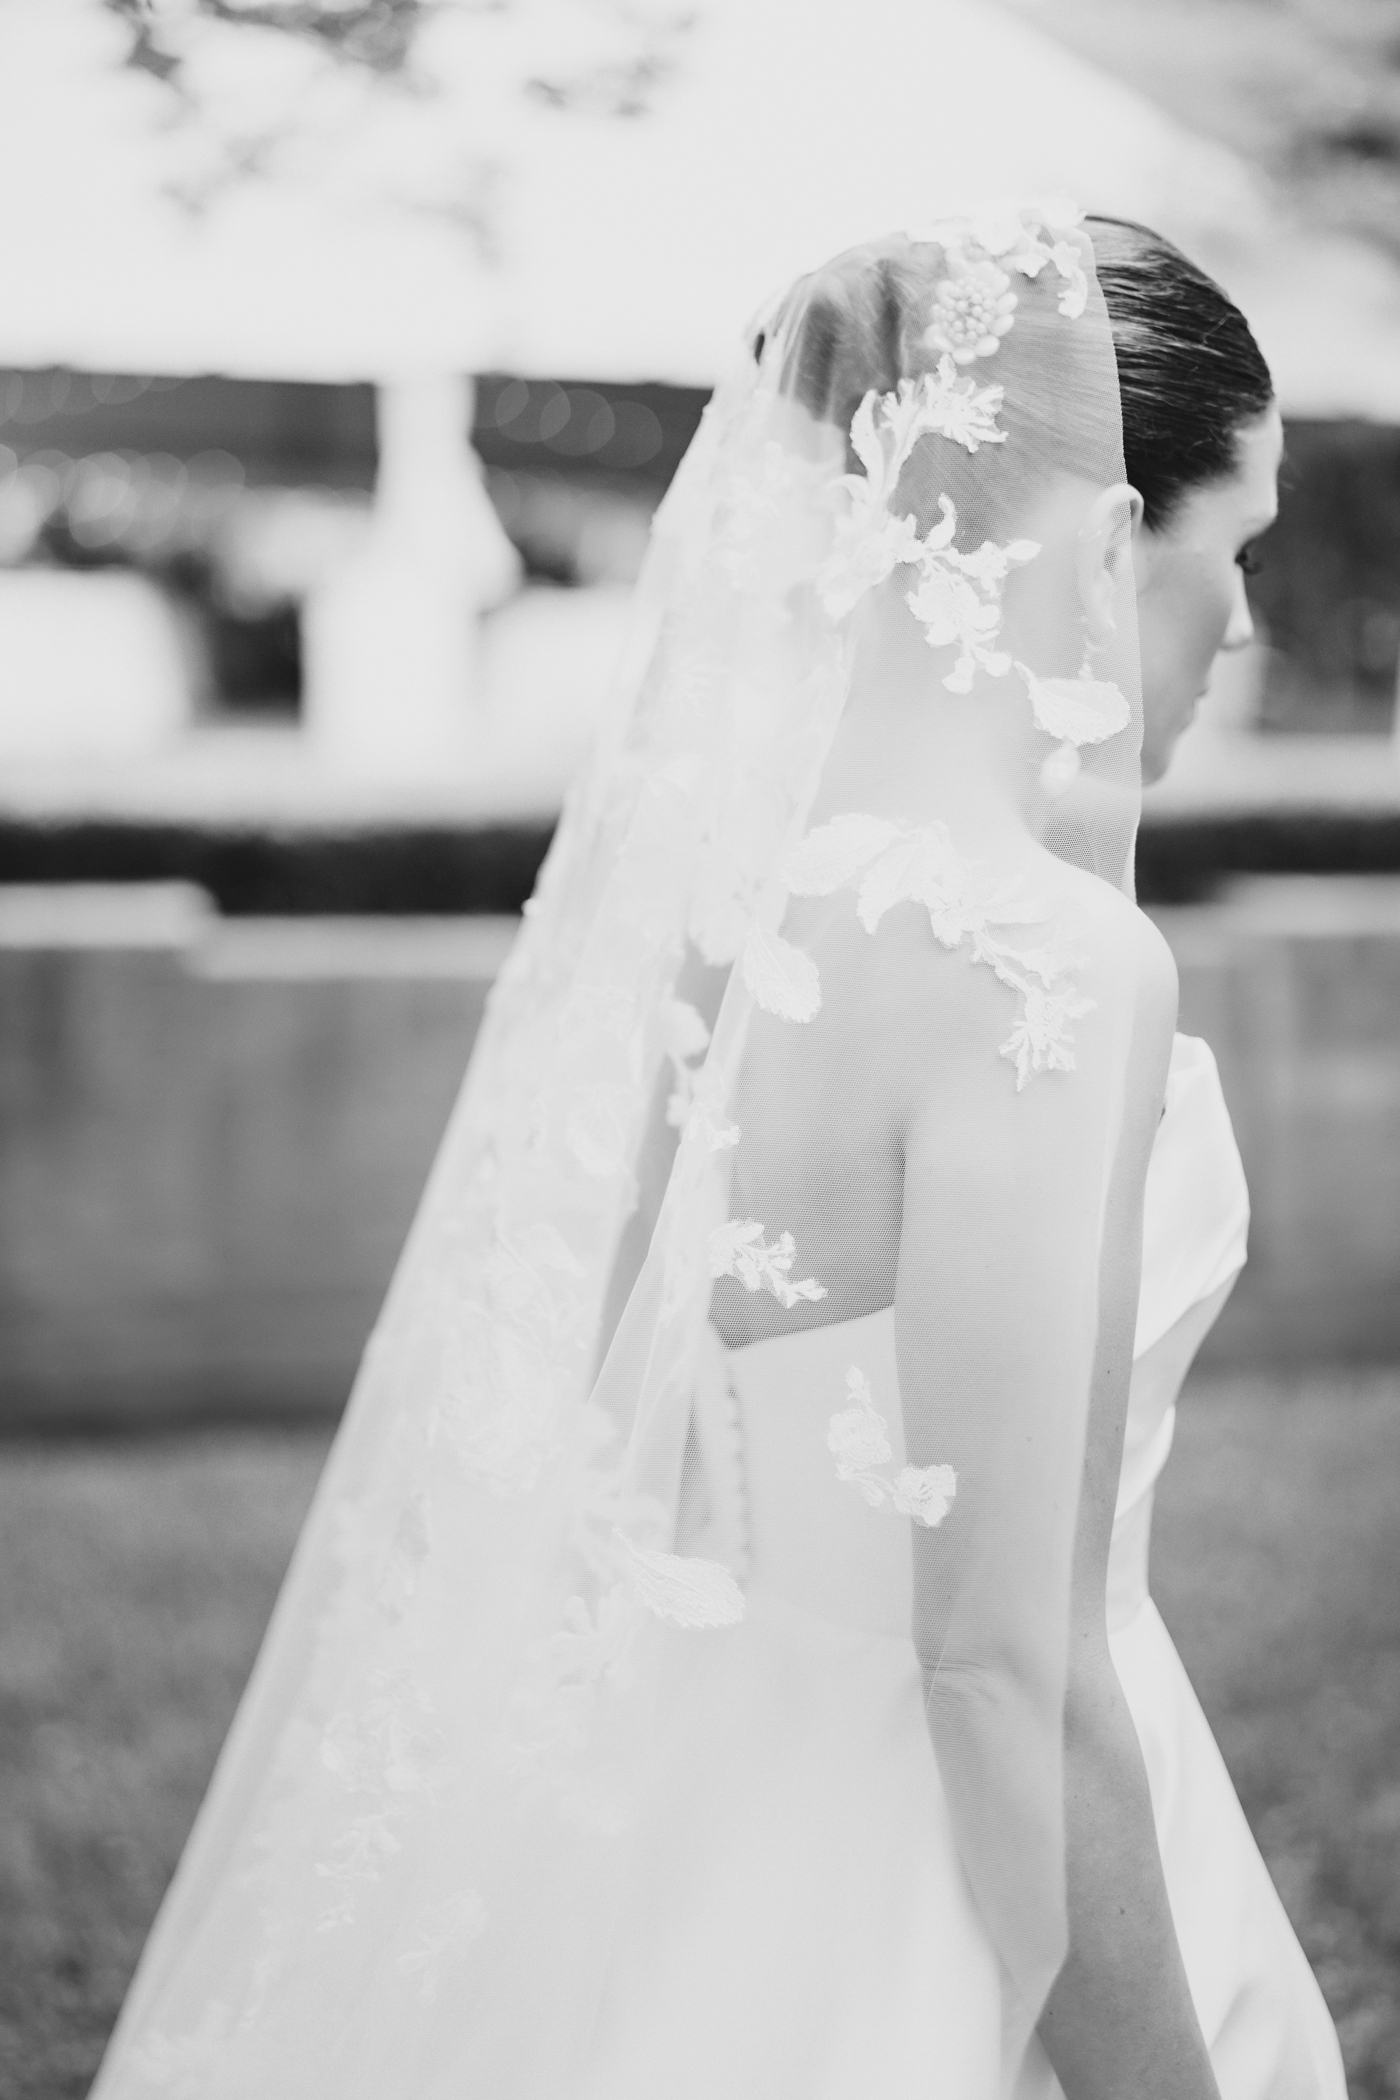 Black and white portrait of a bride with a lace veil